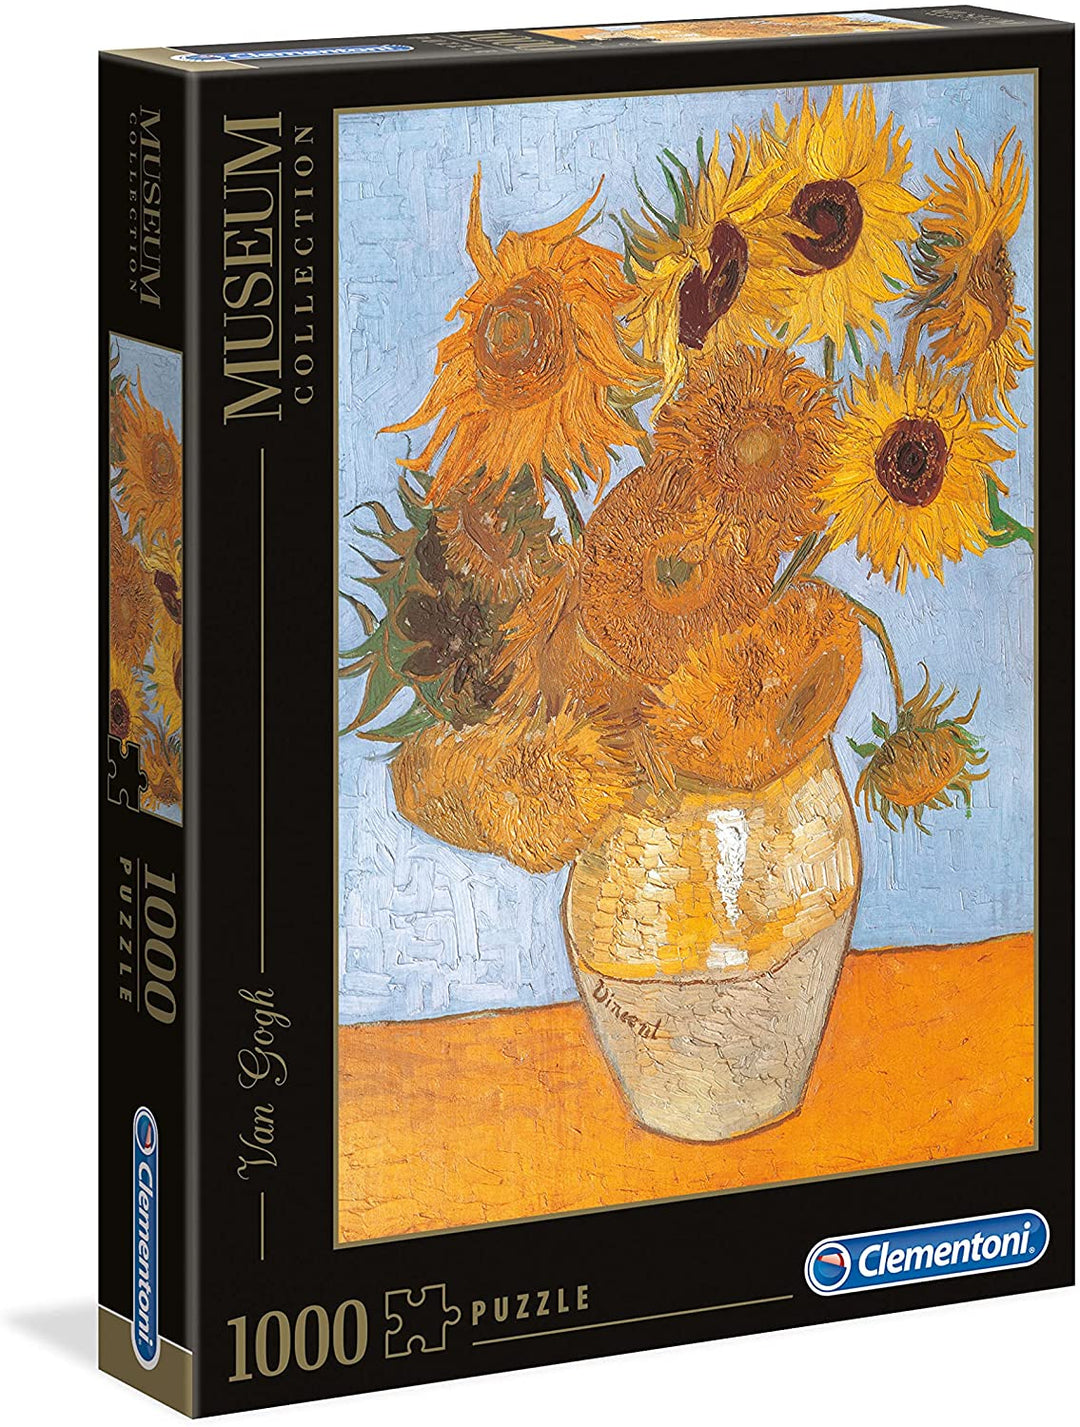 Clementoni 31438 Museum Collection puzzle for adults and children Van Gogh Sunflowers 1000 Pieces